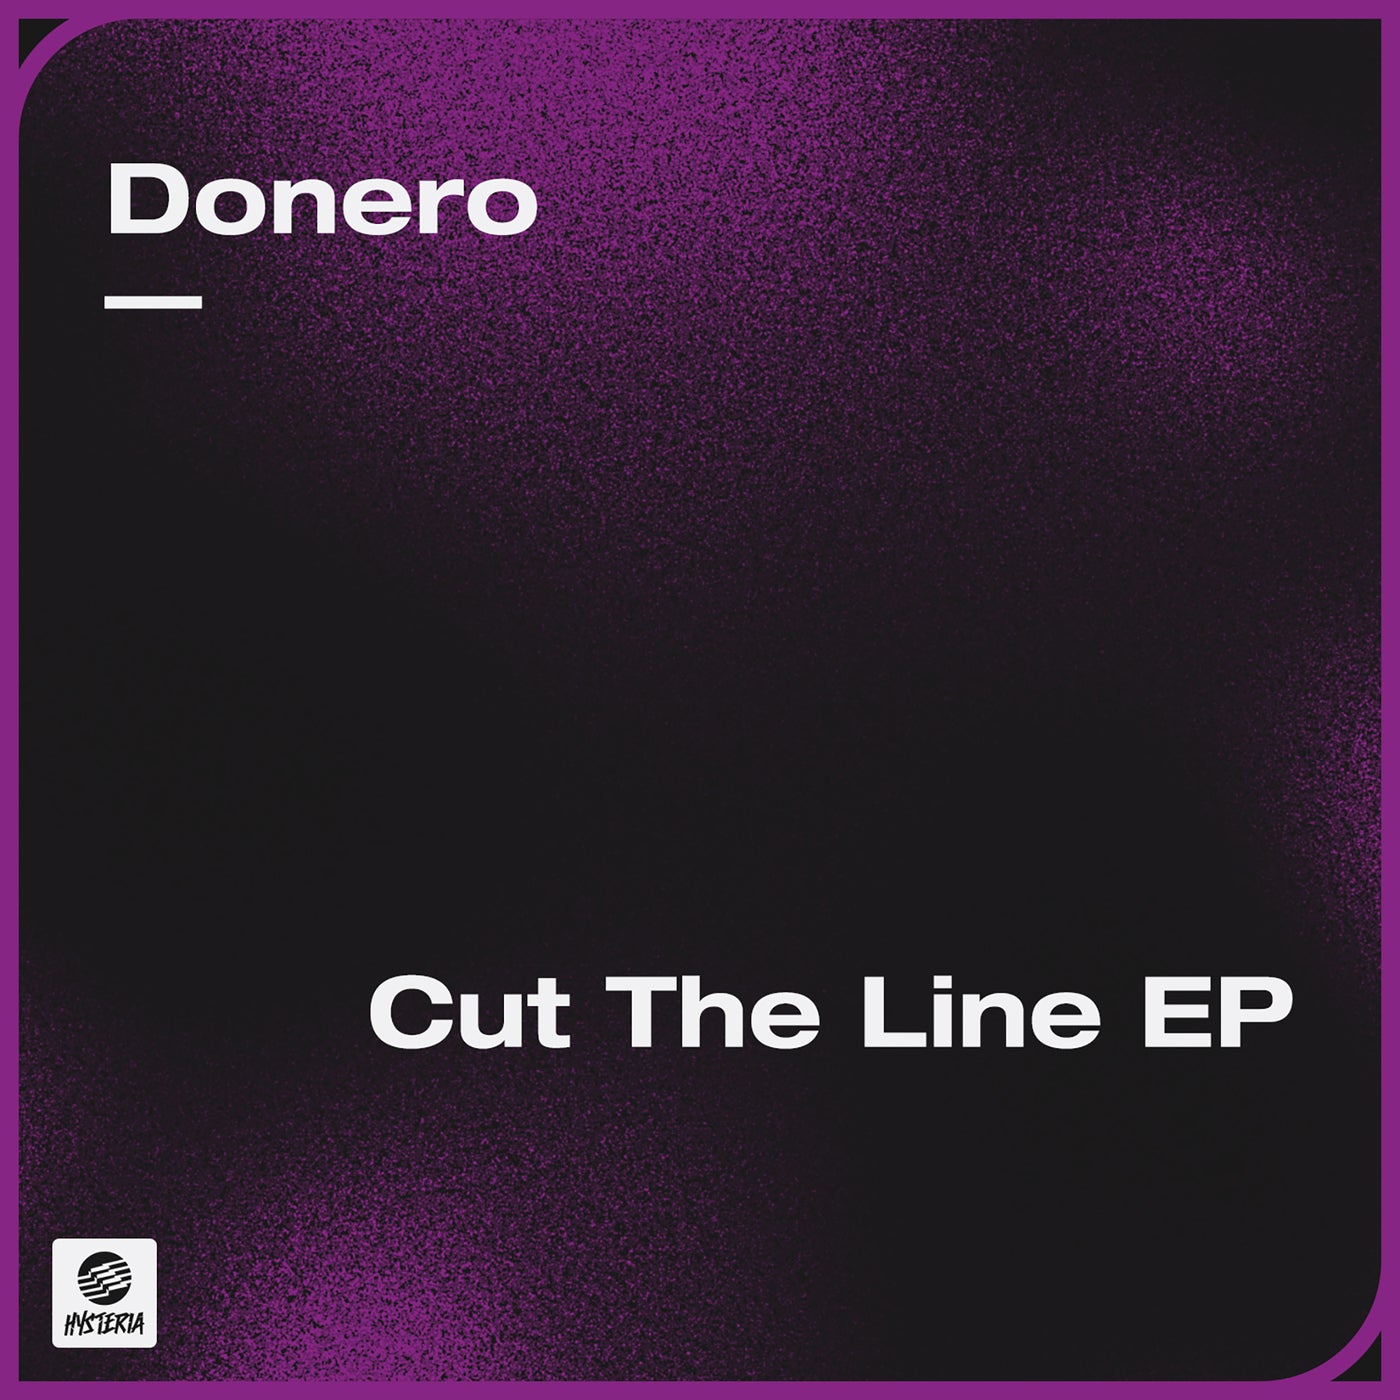 Donero. Hysteria records 2021. Bass extended mix